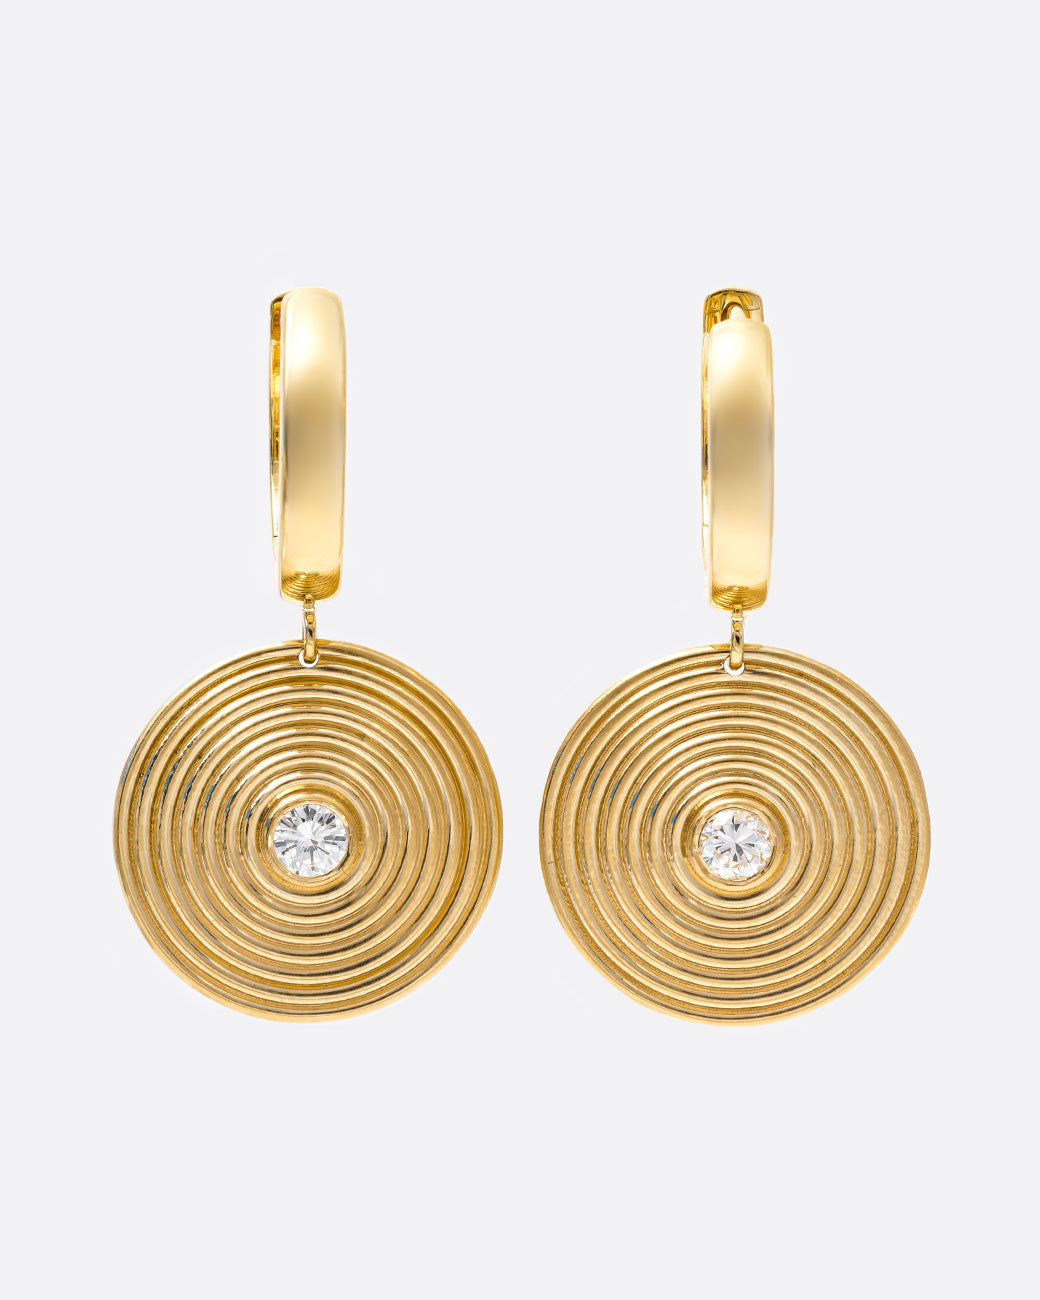 14k yellow gold hoop earrings with round ribbed diamond drops by Selin Kent, shown from the front.